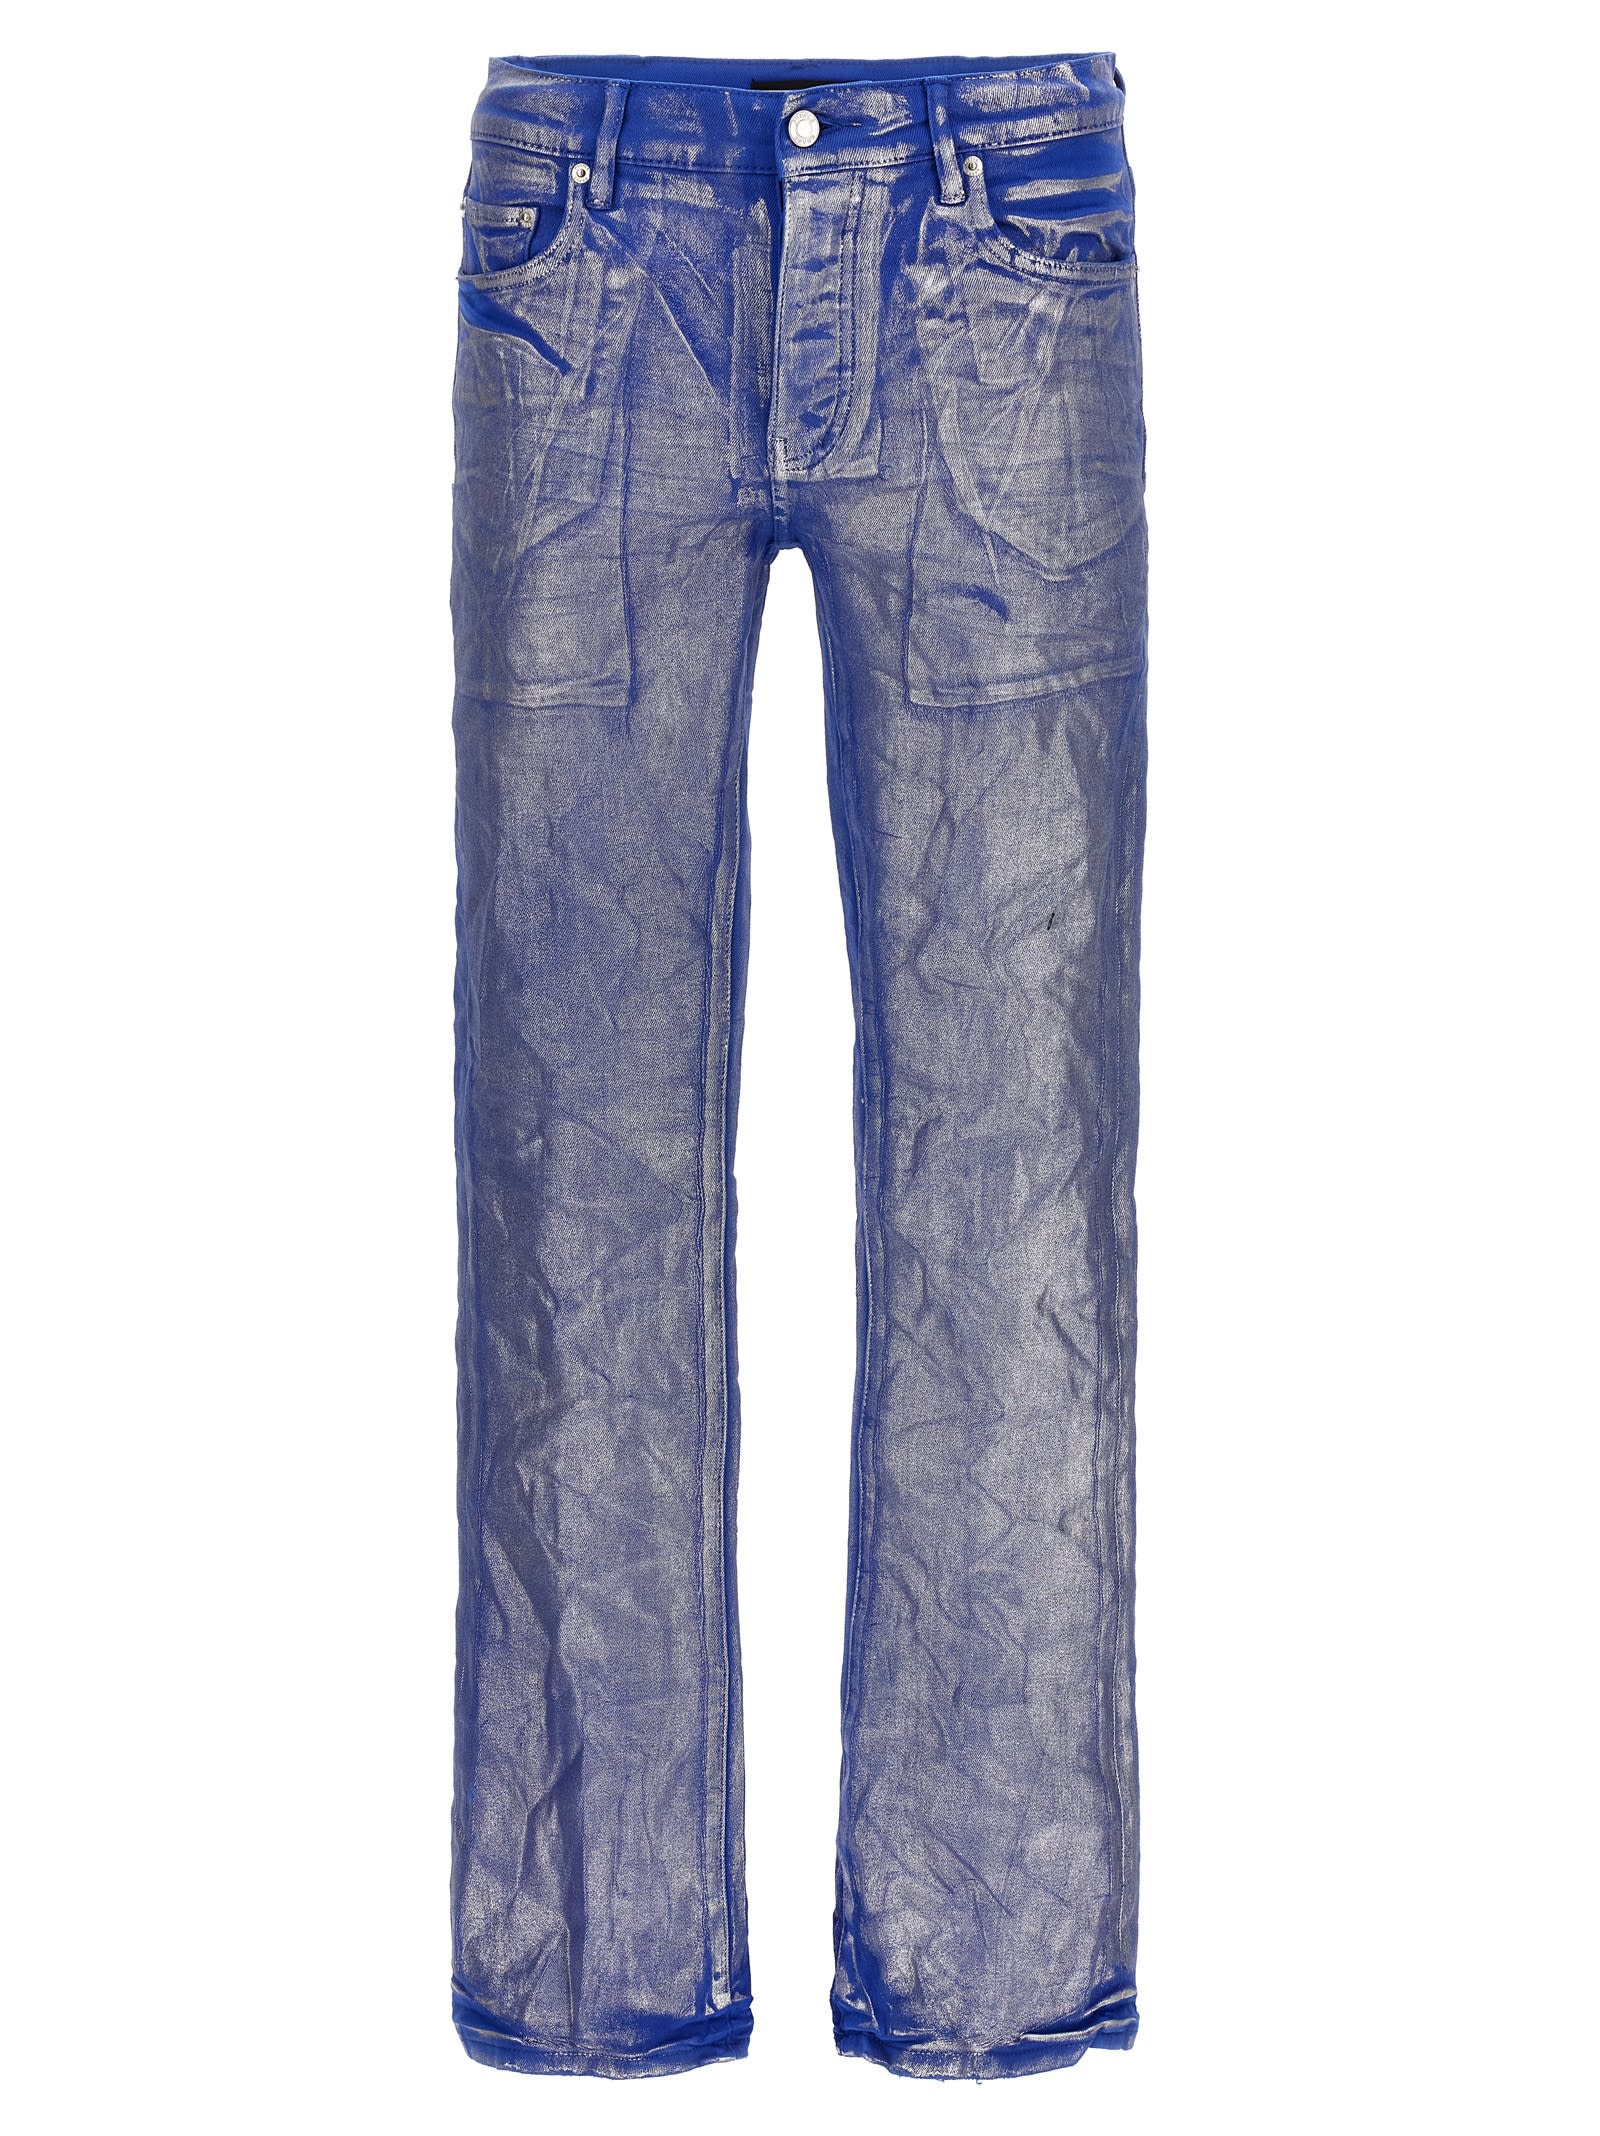 silver Foil Flare Jeans